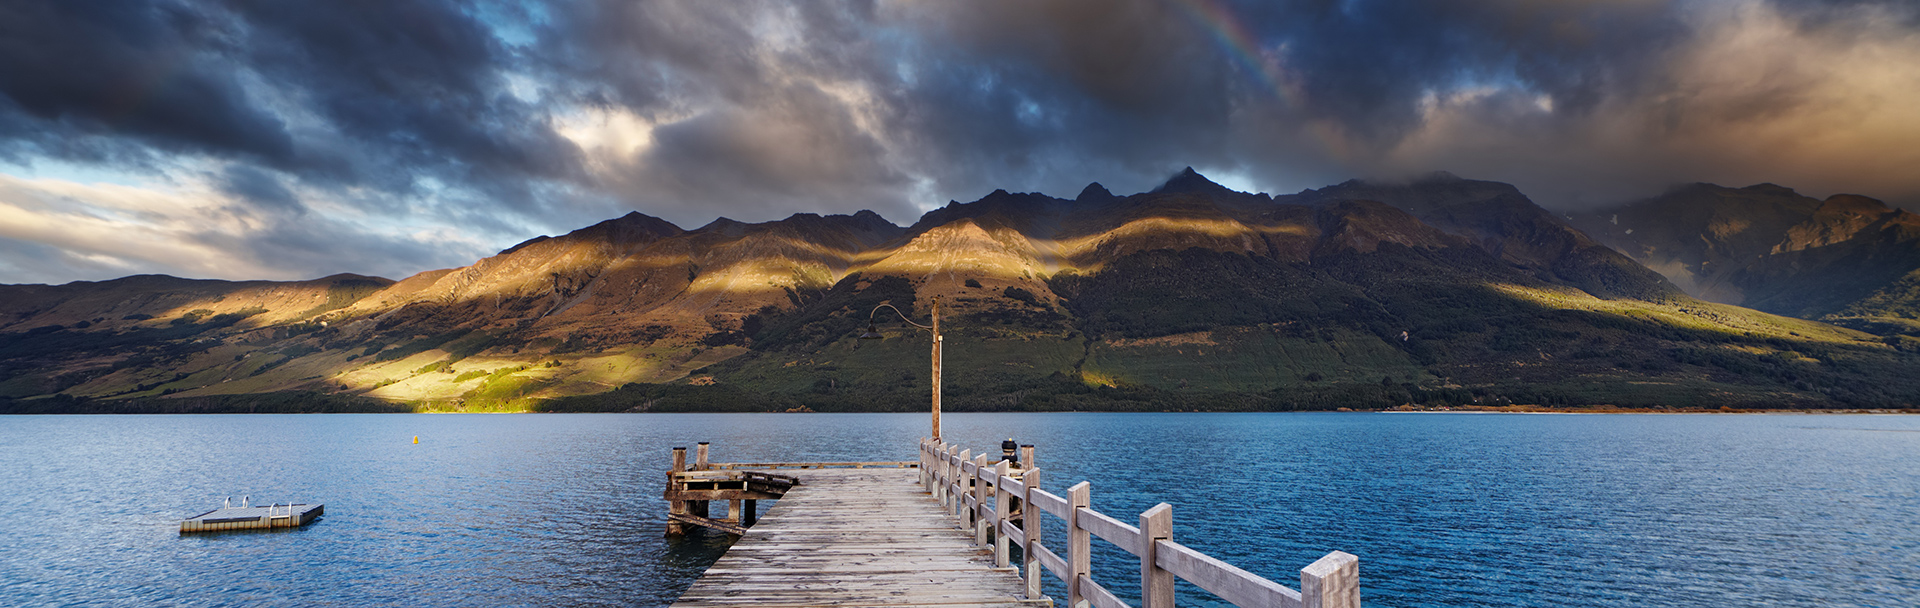 Personalised tours of New Zealand's South Island